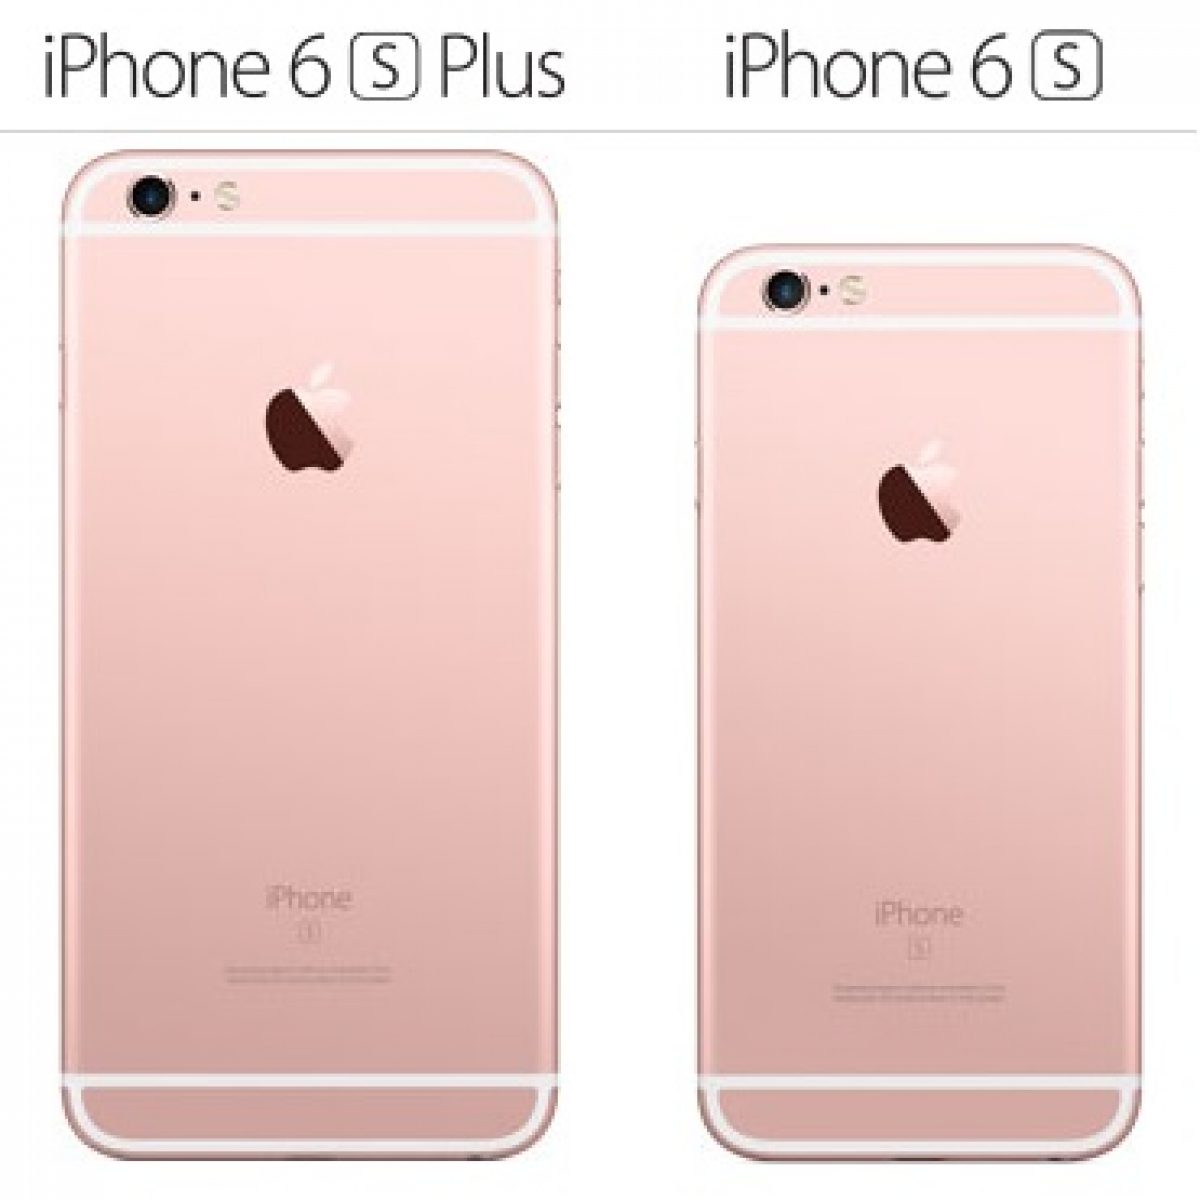 Remmen Giftig vliegtuigen iPhone 6S or iPhone 6S Plus? Pros and Cons!